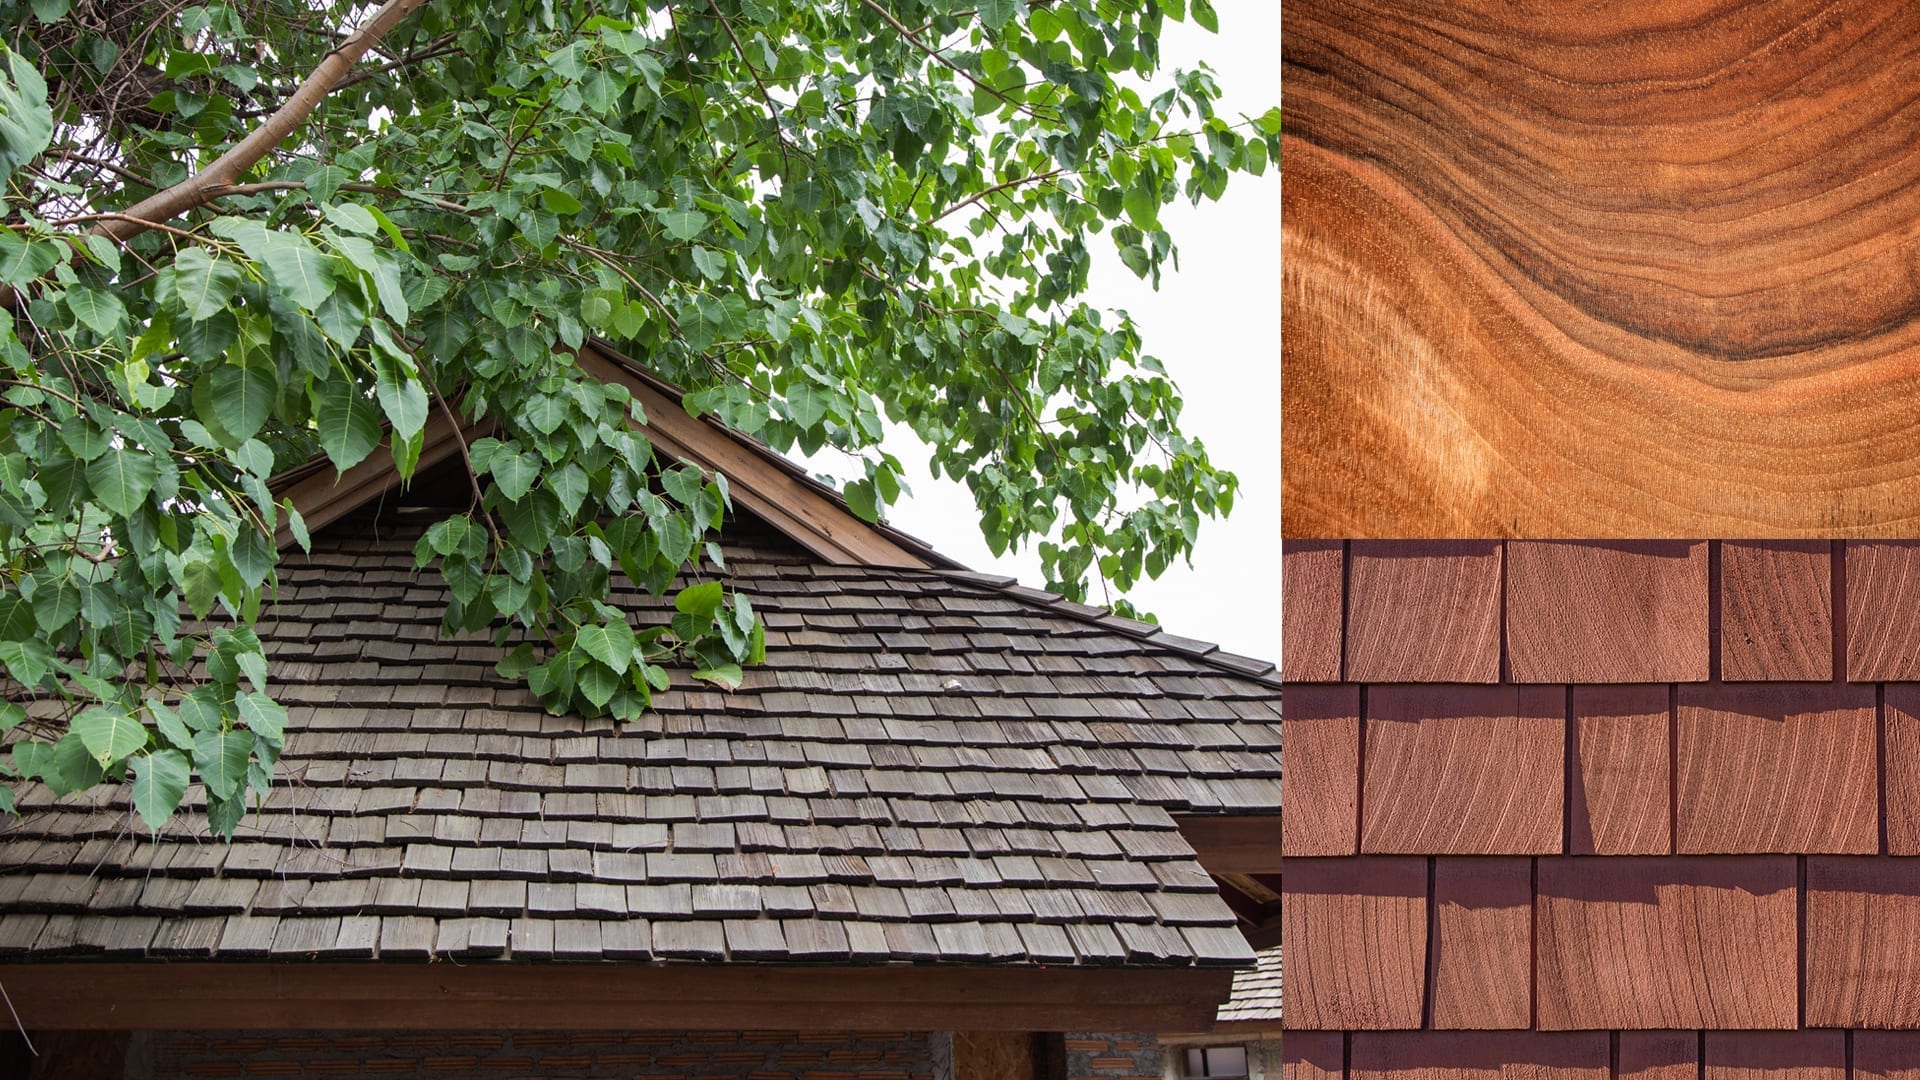 montage of wood shake roofs